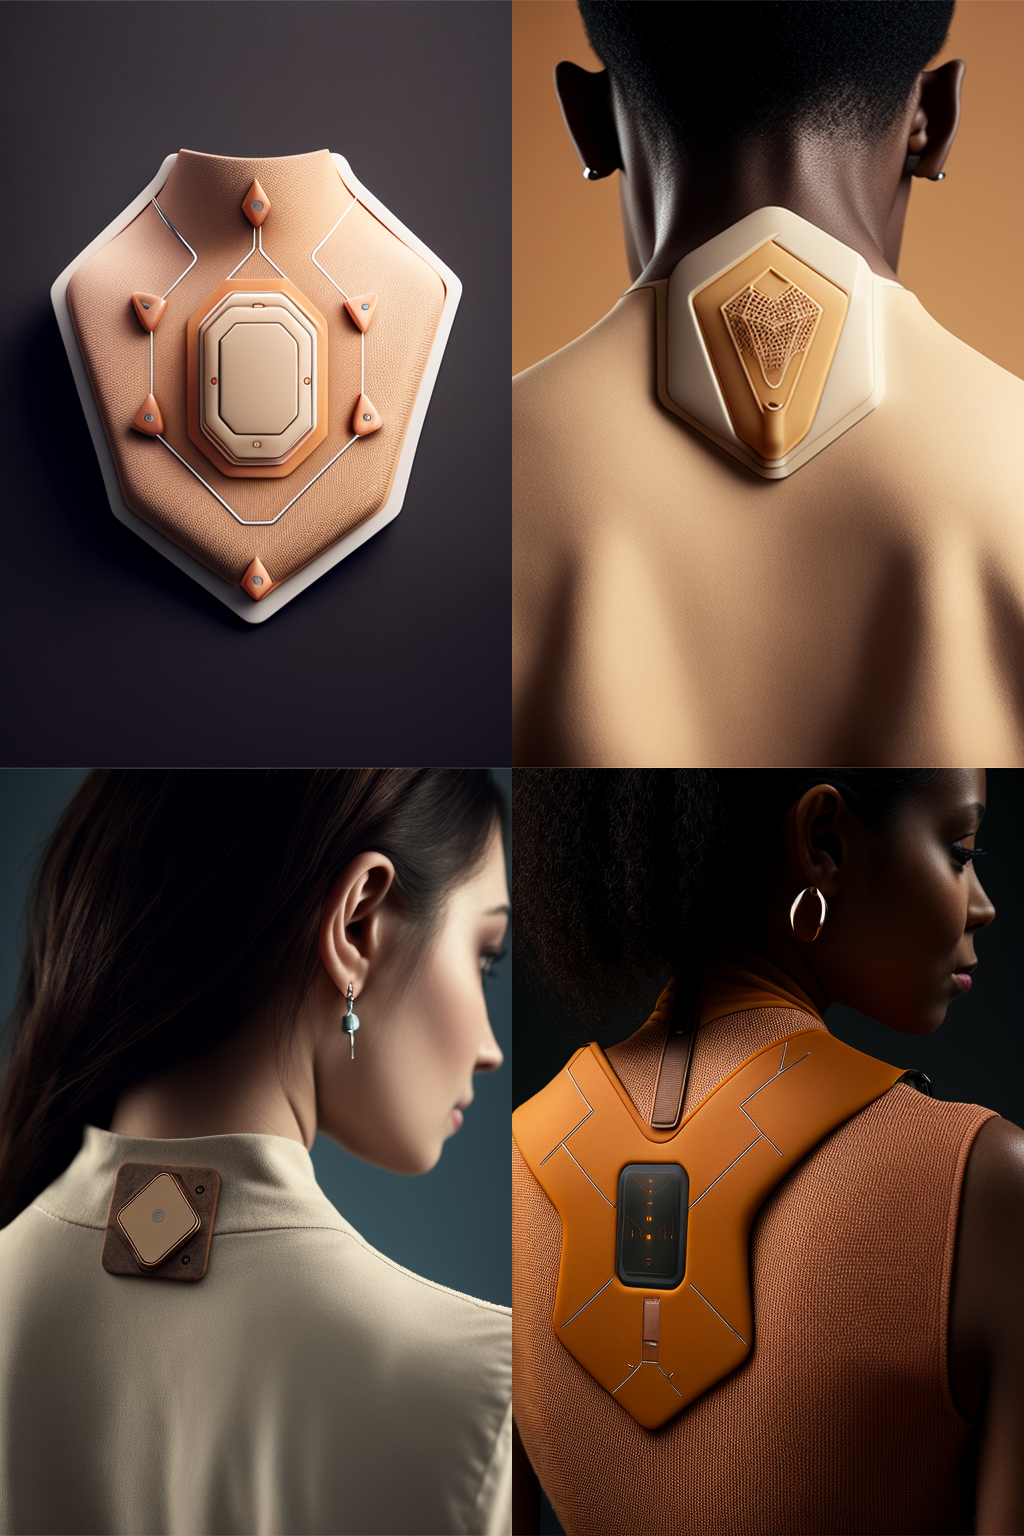 thecreator_A_minimal_skin-tone_colored_wearable_patch_device_me_061ab39f-32f0-4408-be20-b3d5b8e6982f.png